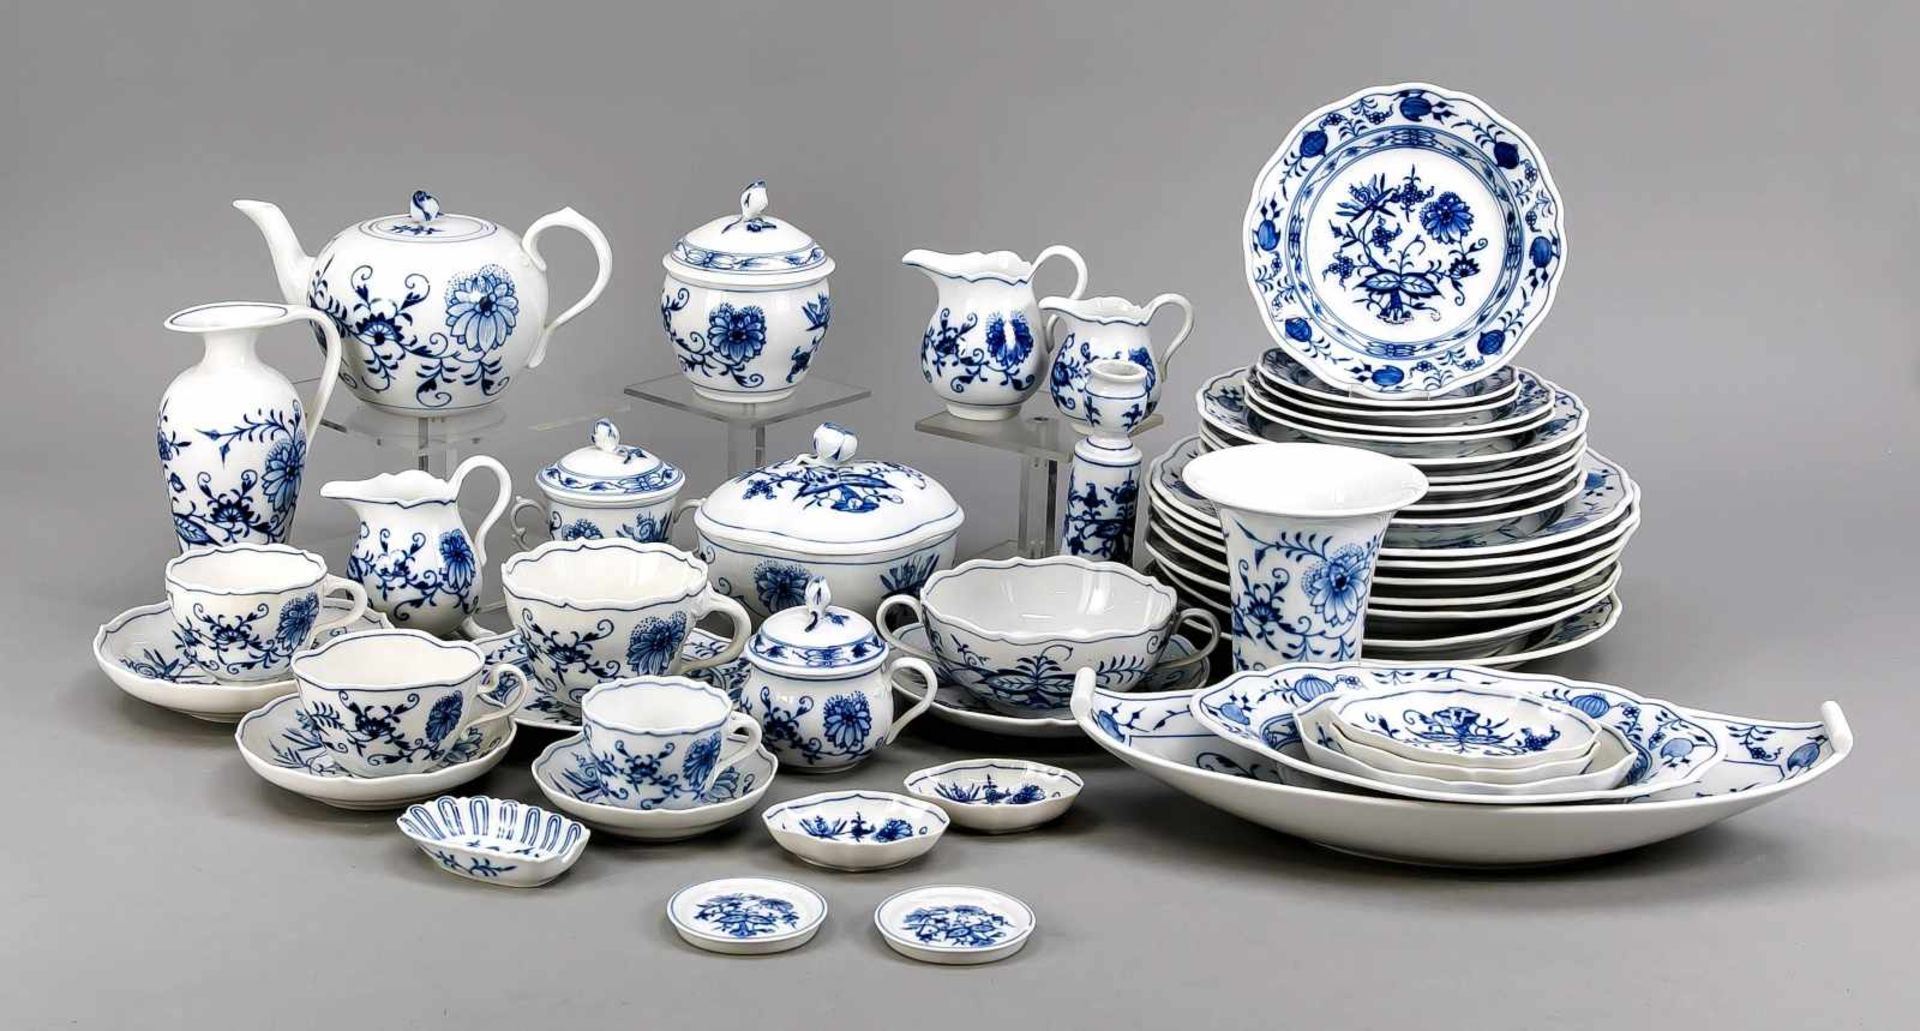 Rest service, approx. 70 pieces, Meissen, 20th century, 3rd choice and deputate, onionpattern in